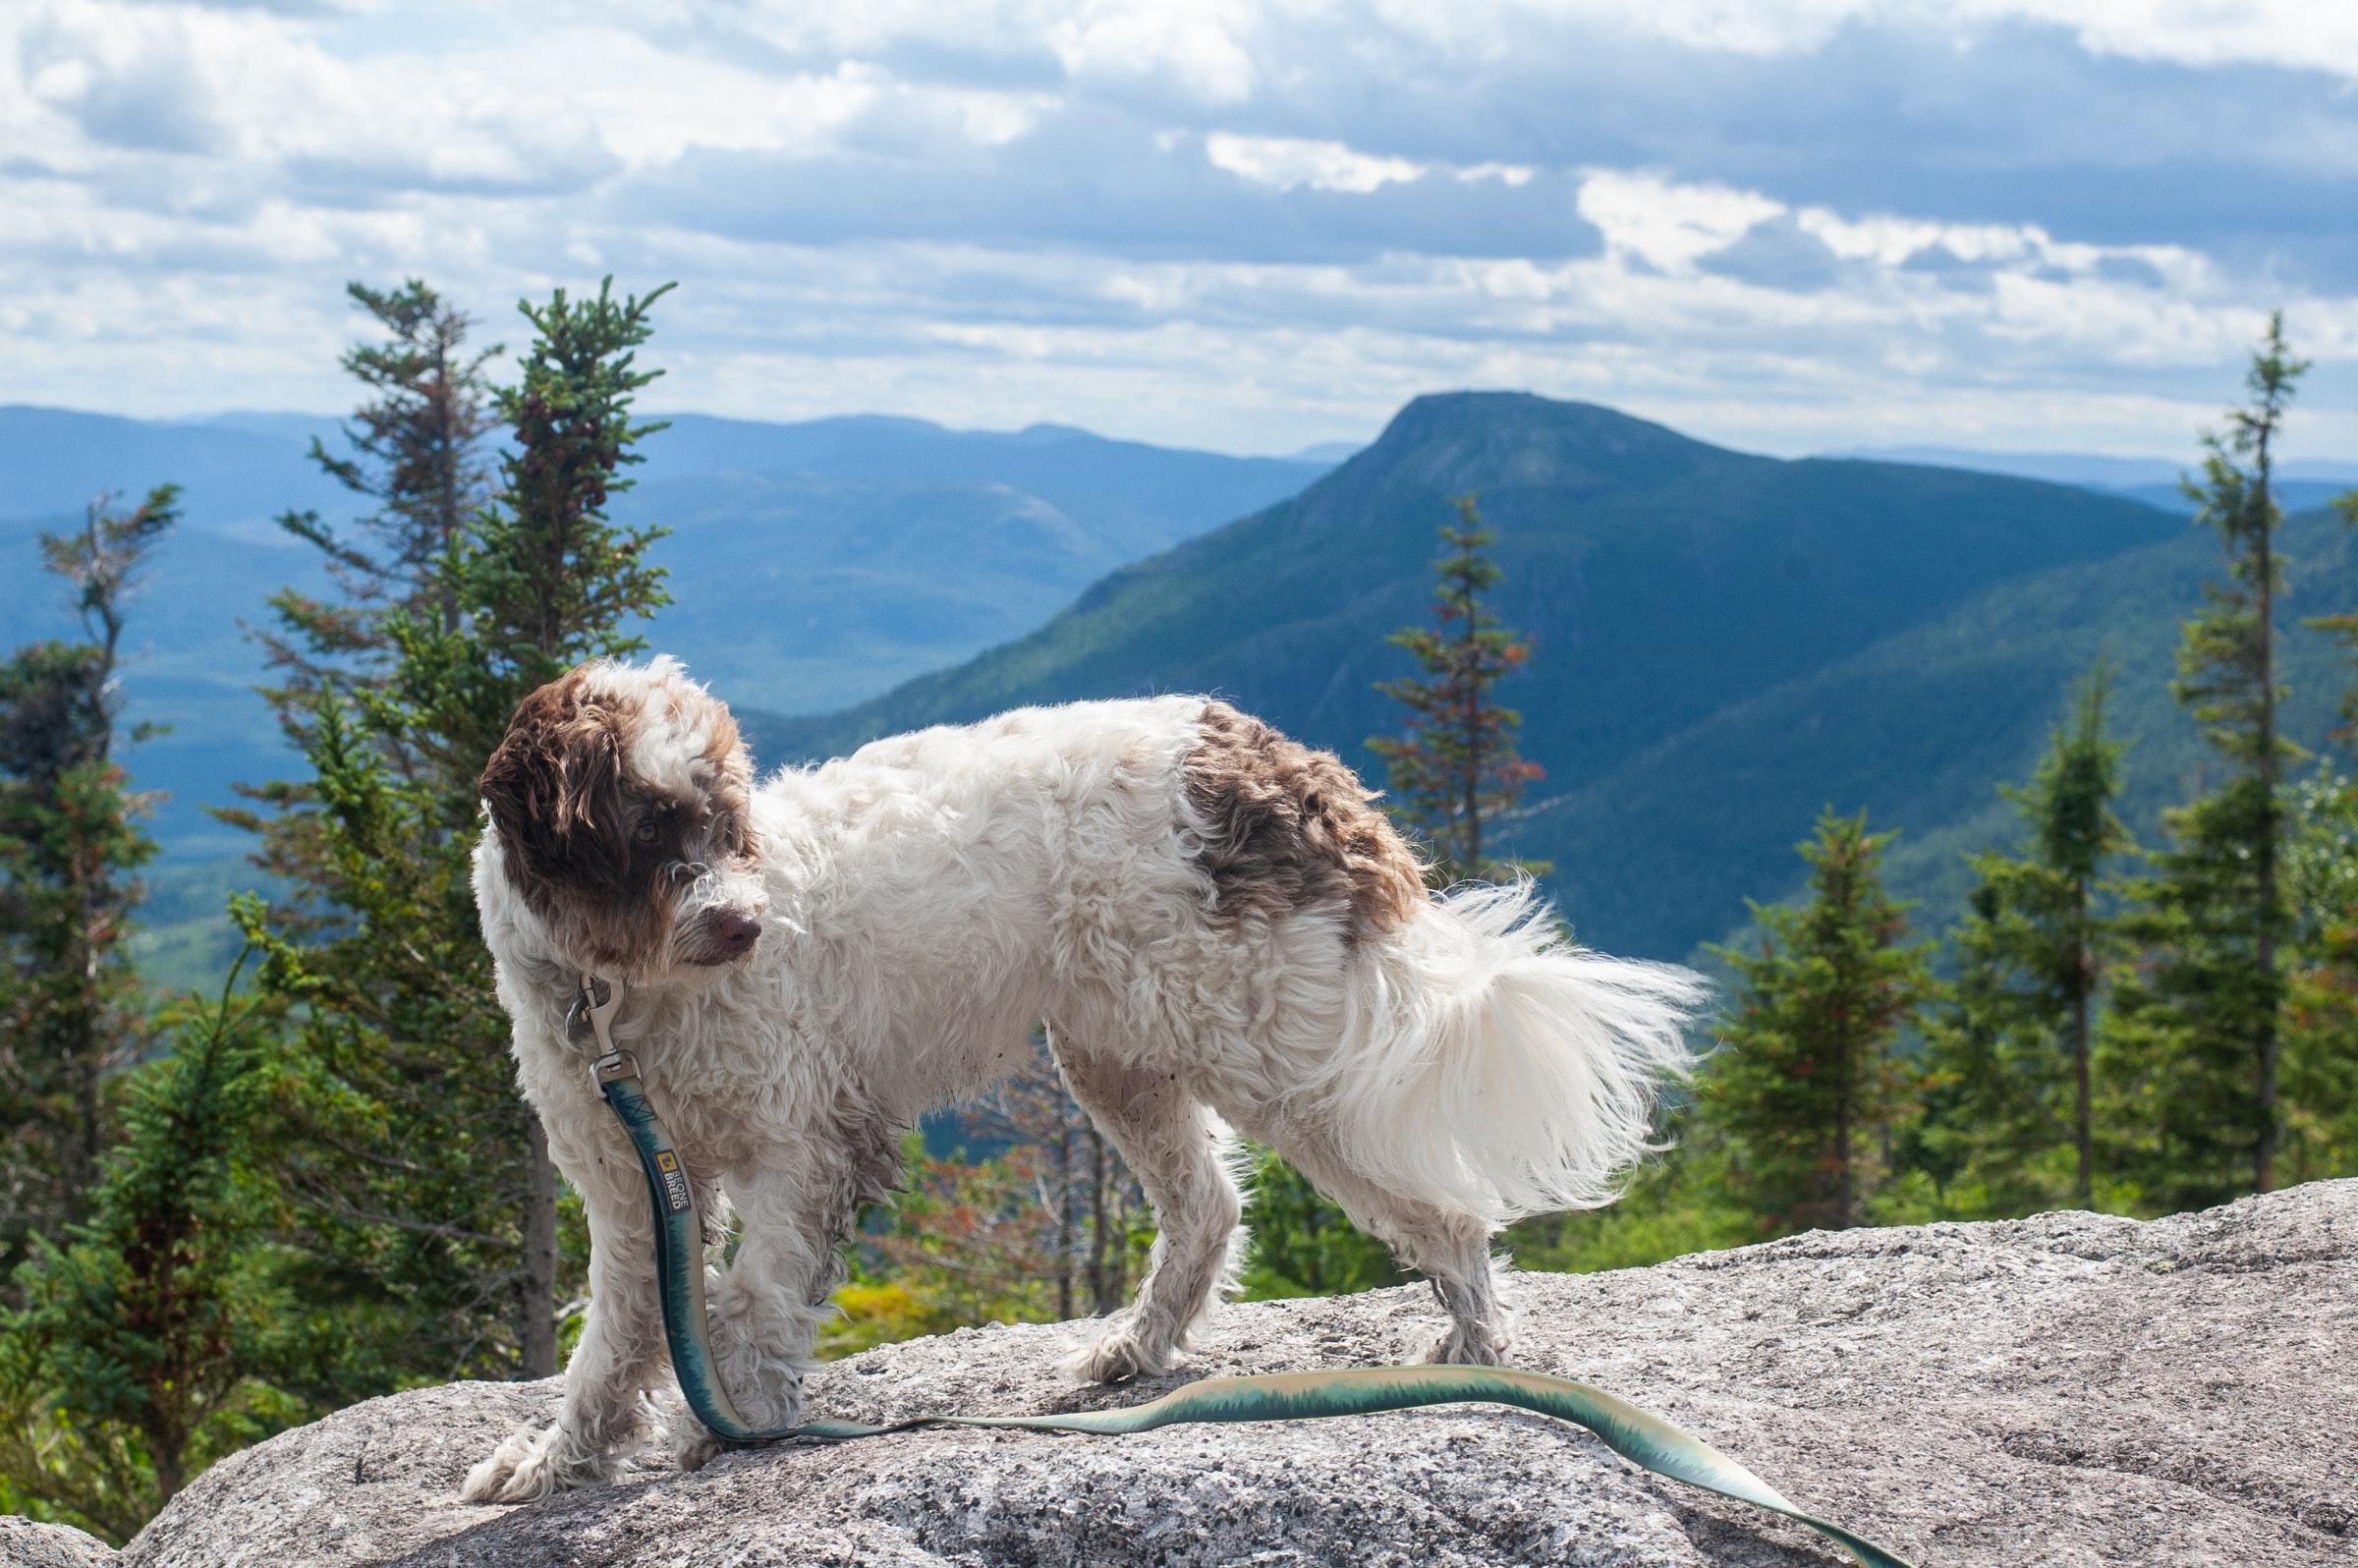 Dog friendly National Parks: Where your pup can roam